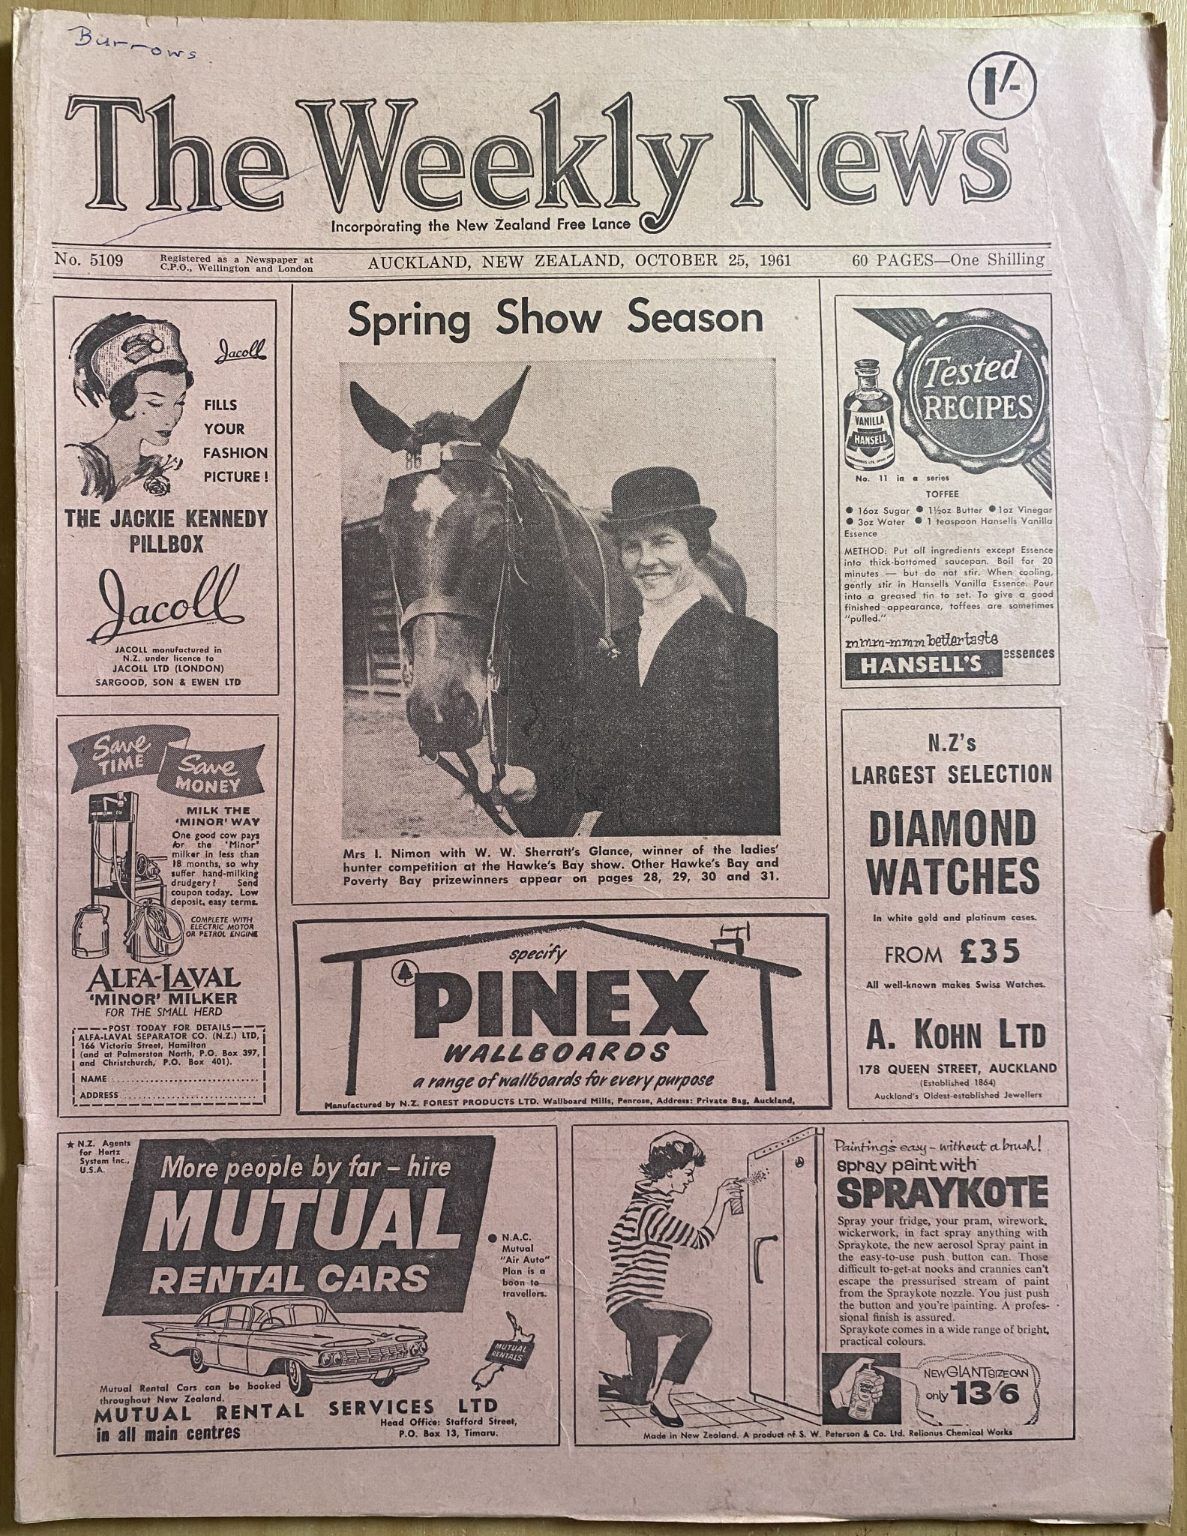 OLD NEWSPAPER: The Weekly News, No. 5109, 25 October 1961